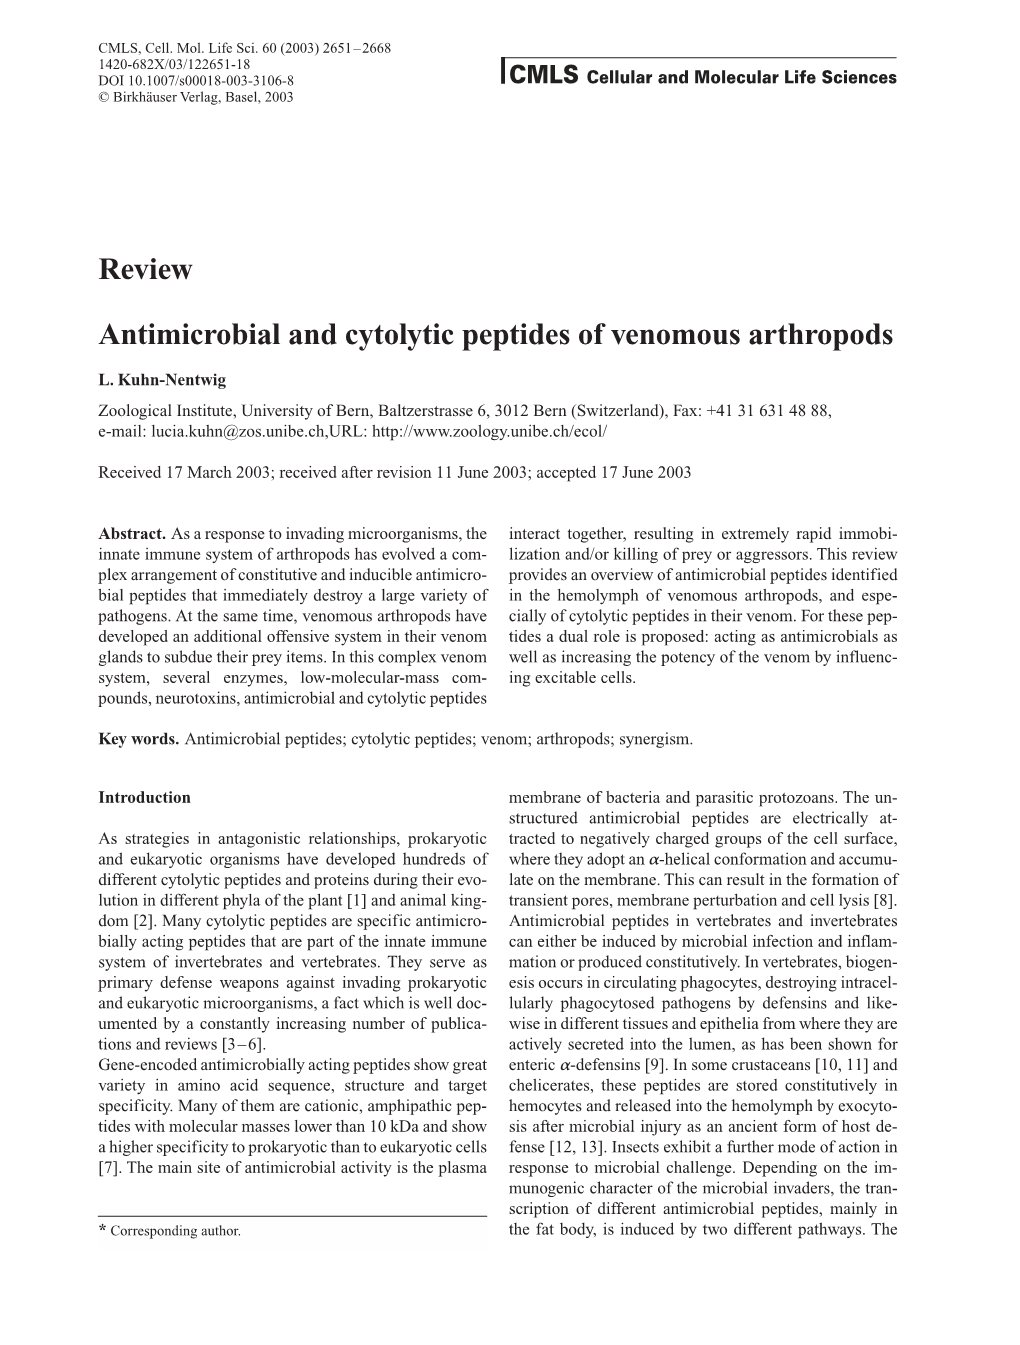 Review Antimicrobial and Cytolytic Peptides of Venomous Arthropods